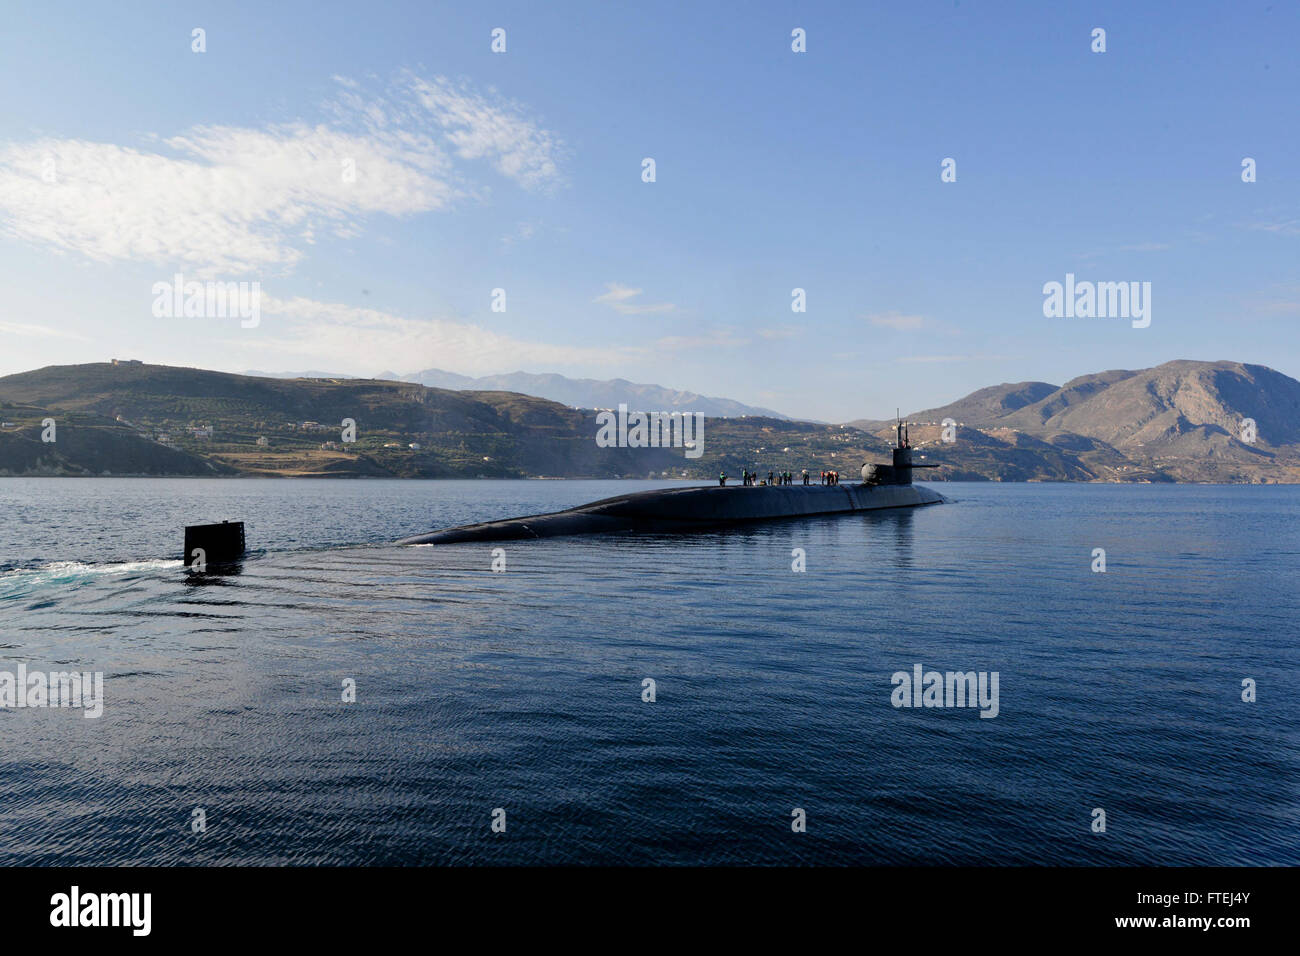 SOUDA BAY, Greece (Nov. 5) - The Ohio-class guided-missile submarine USS Florida (SSGN 728) enters Souda Bay during a scheduled port visit. Florida, homeported in Kings Bay, Ga., is conducting naval operations with allies in the U.S. 6th Fleet area of operations in order to advance security and stability in Europe. Stock Photo